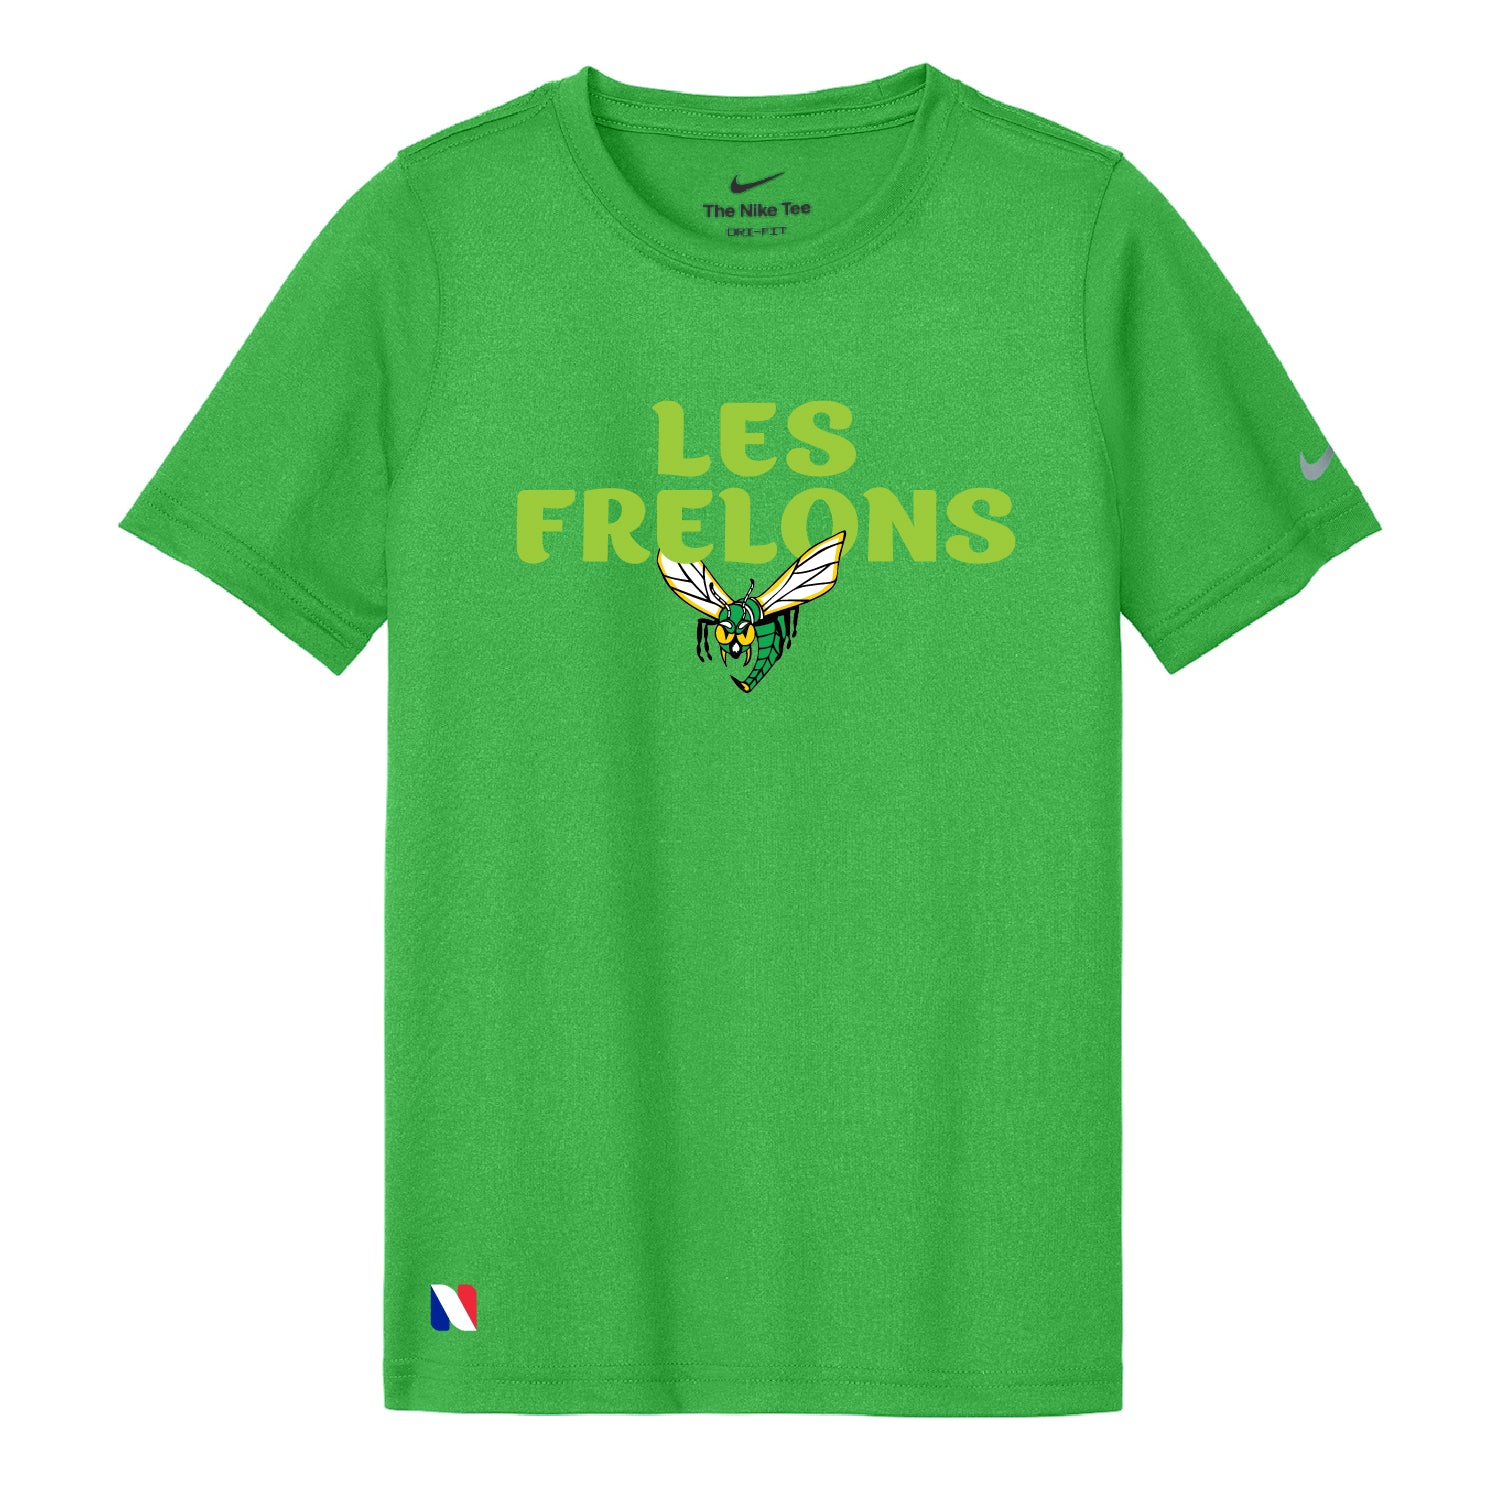 LES FRELONS – NIKE® DRIFIT YOUTH TEE - DSP On Demand